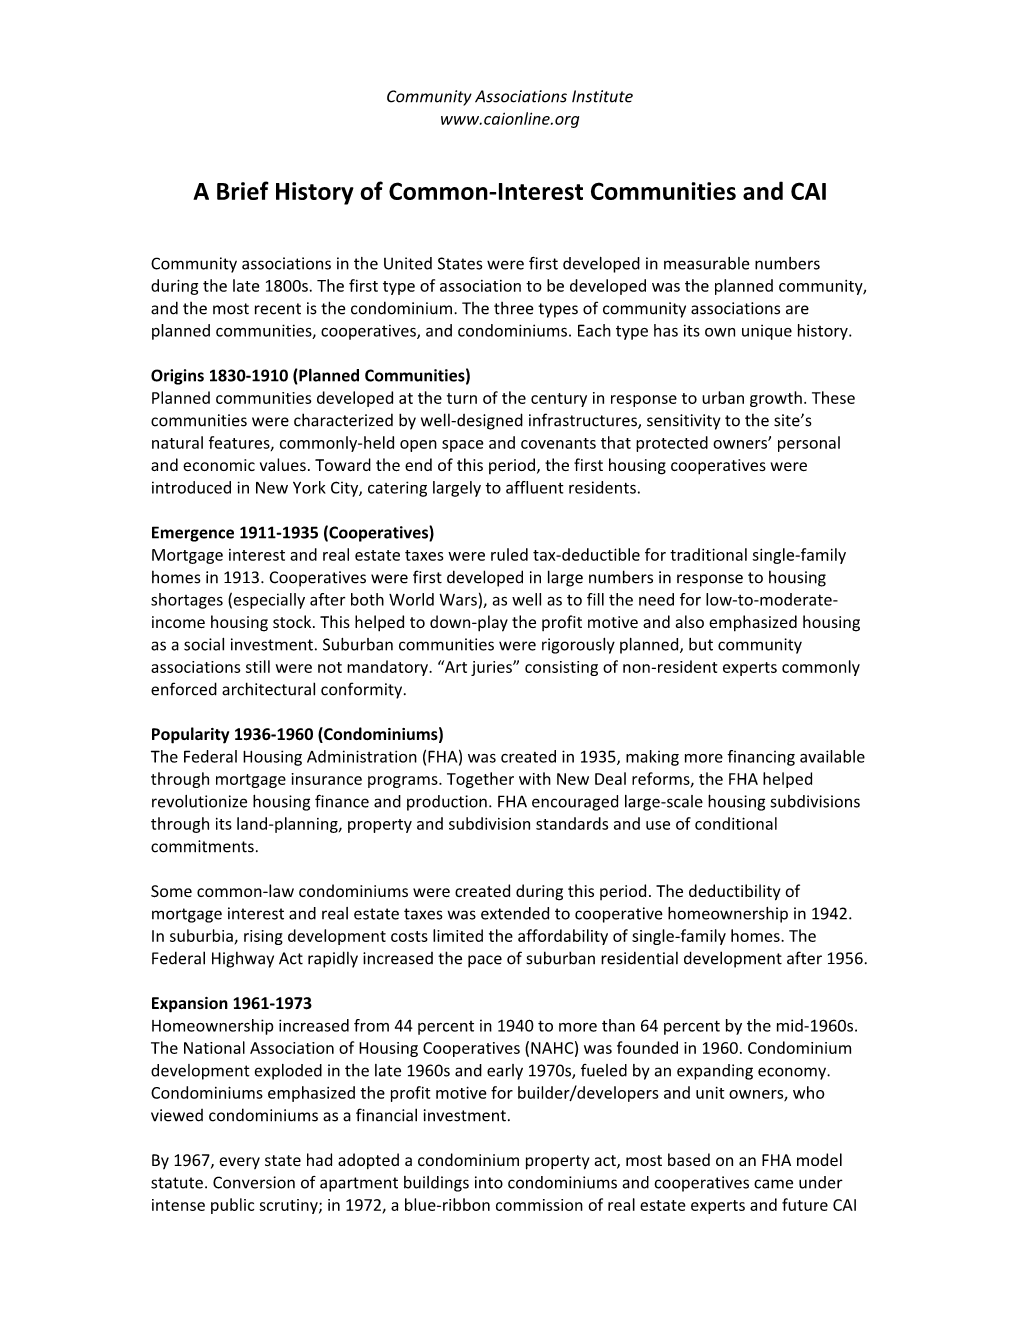 A Brief History of Common-Interest Communities and CAI